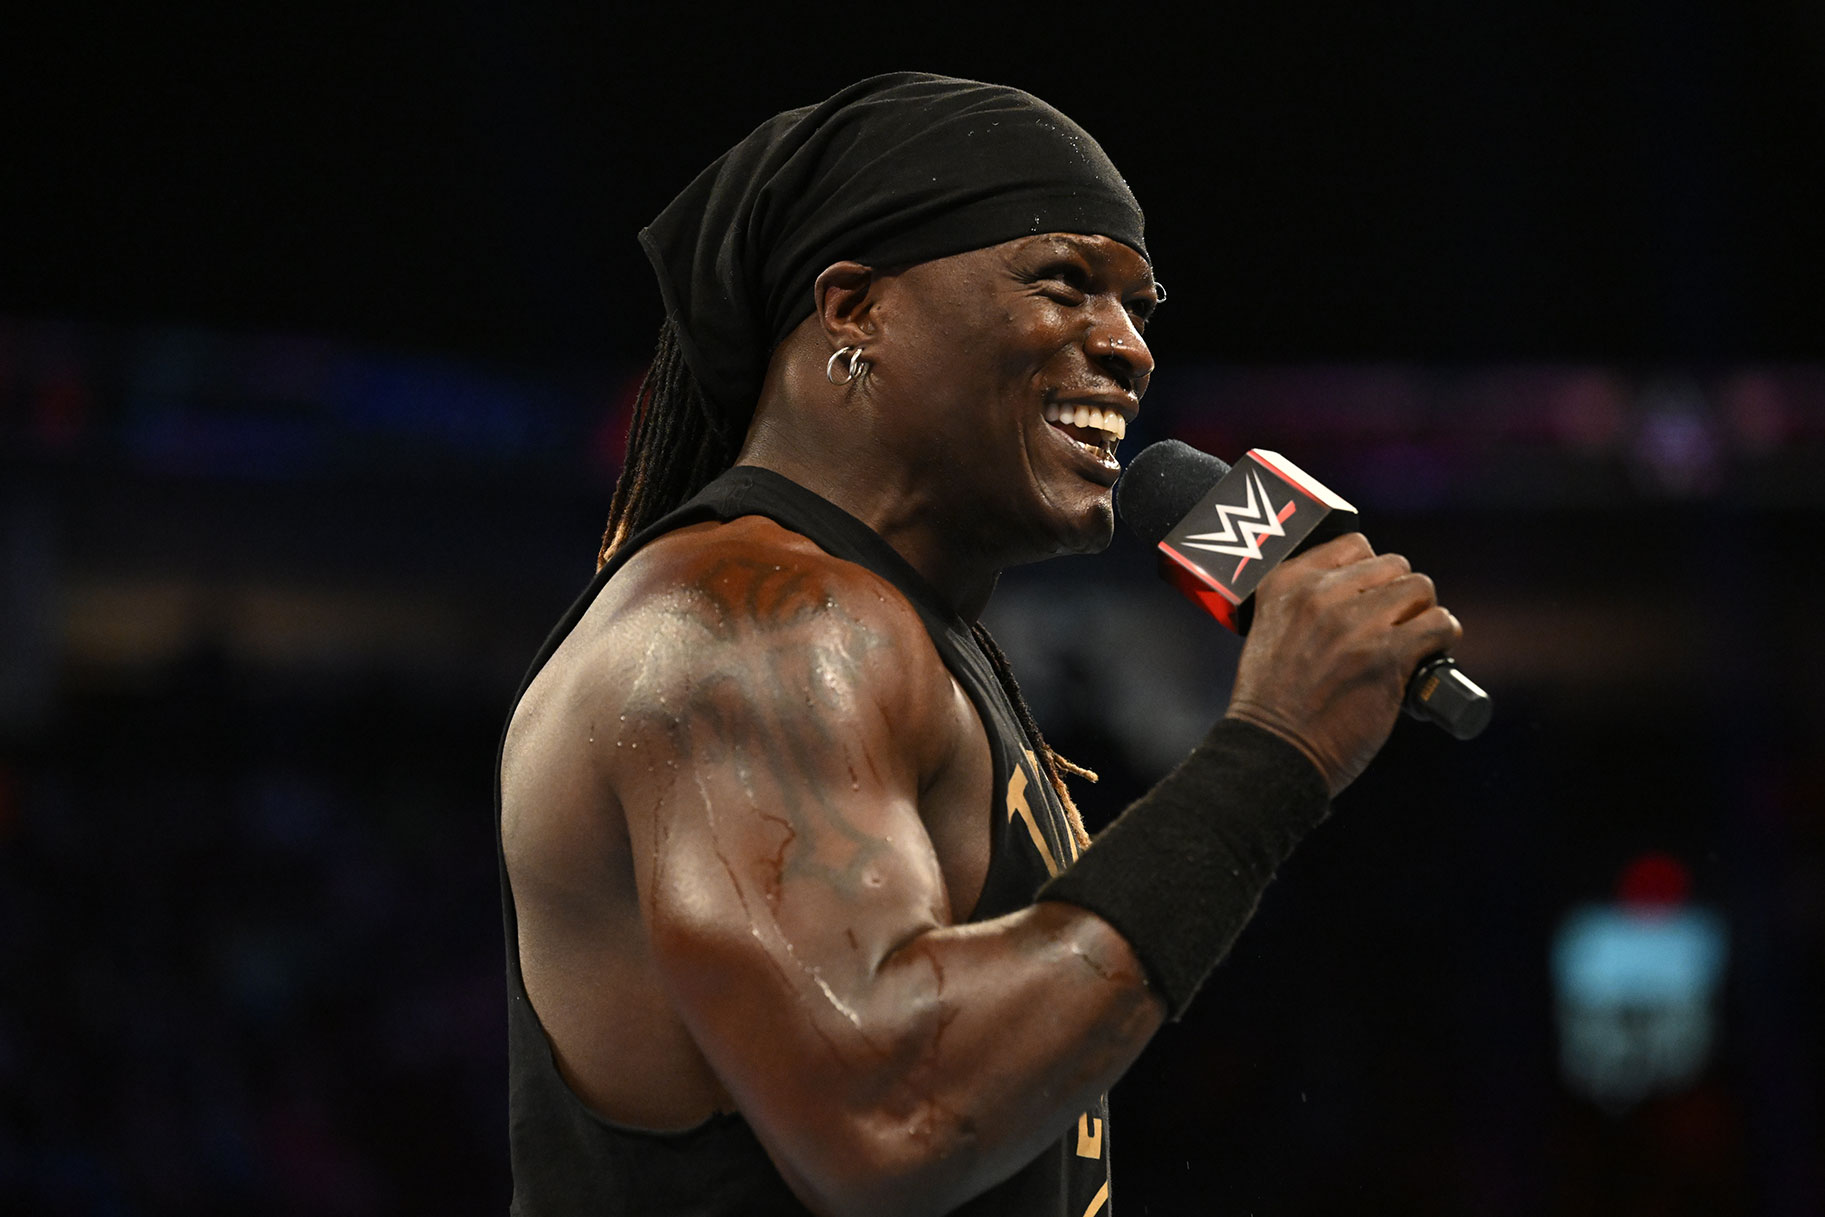 R Truth speaking to the crowd